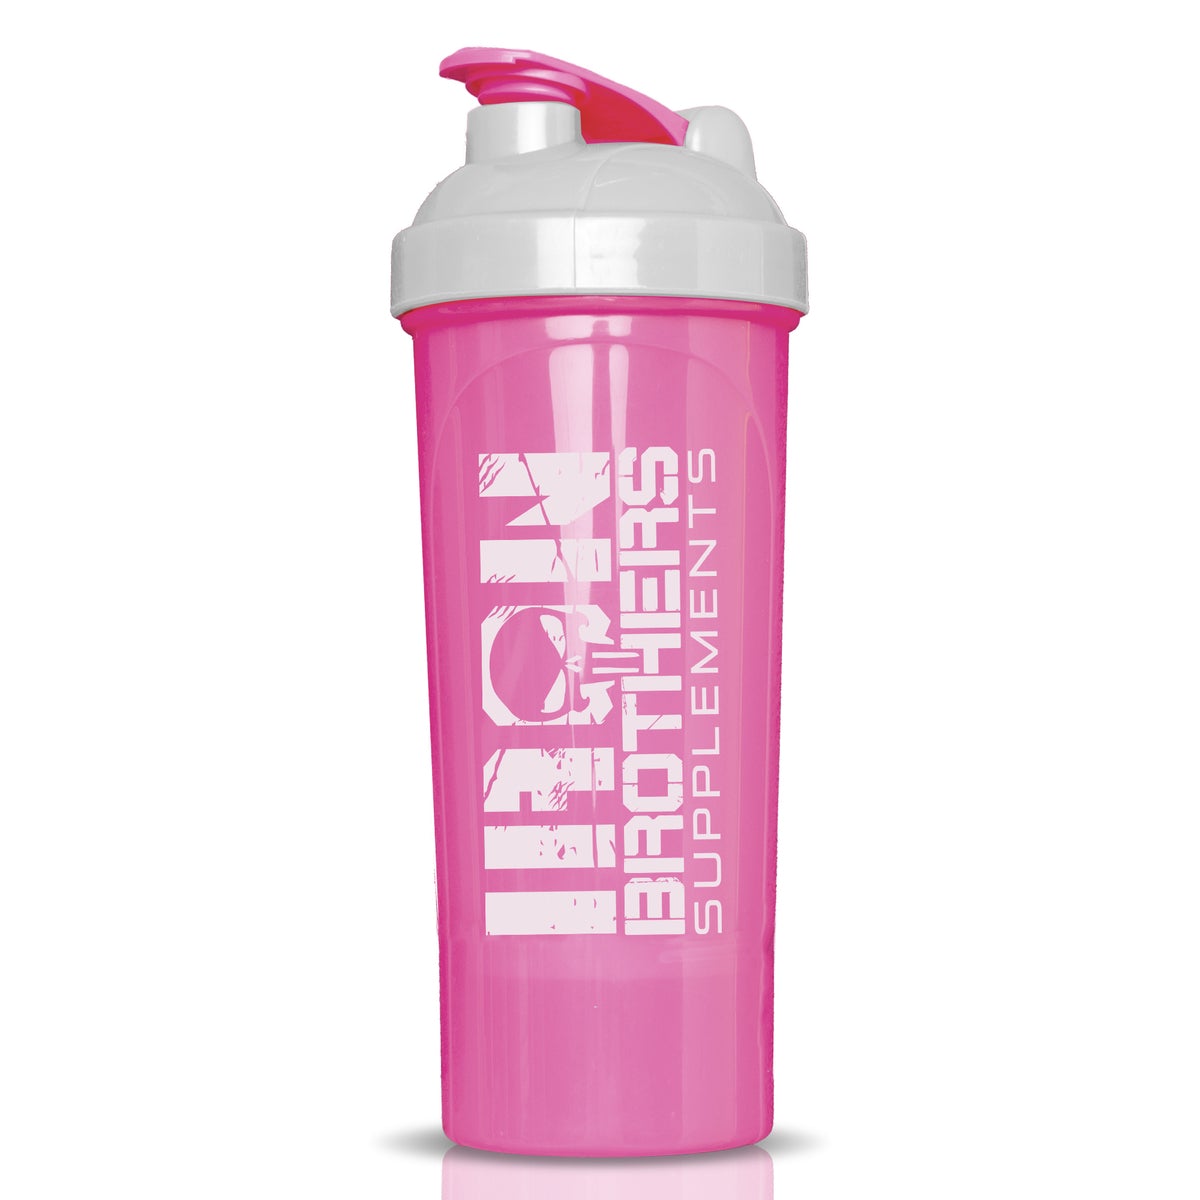 CLEARANCE Iron Brothers Supplements SHAKER CUP Supplementsource.ca